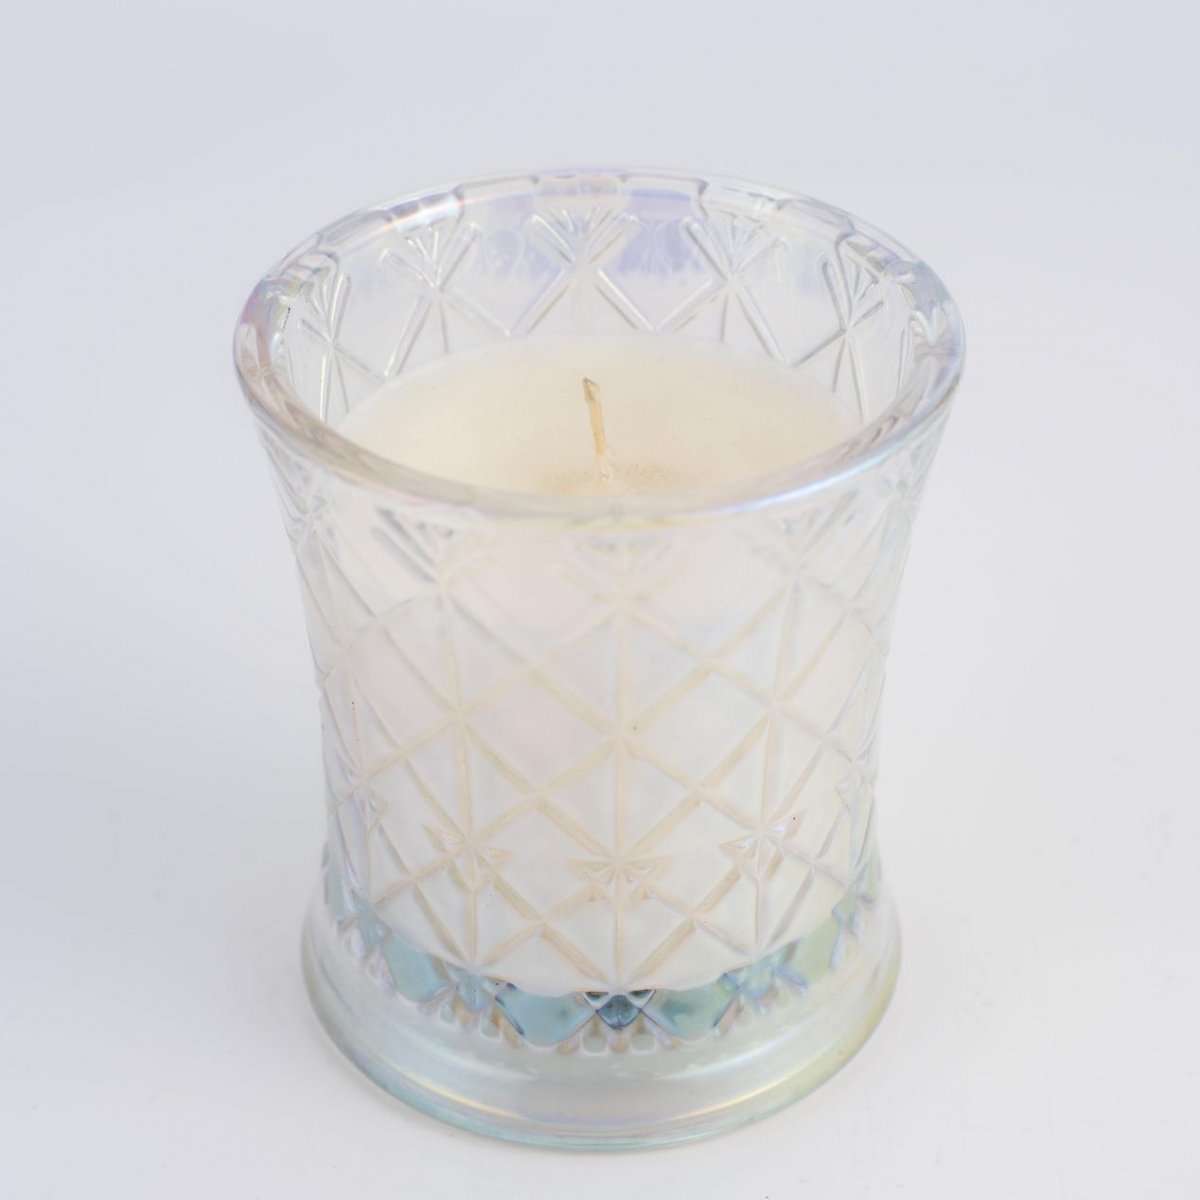 Best Soy Candles -Plant Essential Oils ,Regular Geometry ,Rainbow Candle Jar ,Scented Candles ,China Factory ,Price-HOWCANDLE-Candles,Scented Candles,Aromatherapy Candles,Soy Candles,Vegan Candles,Jar Candles,Pillar Candles,Candle Gift Sets,Essential Oils,Reed Diffuser,Candle Holder,